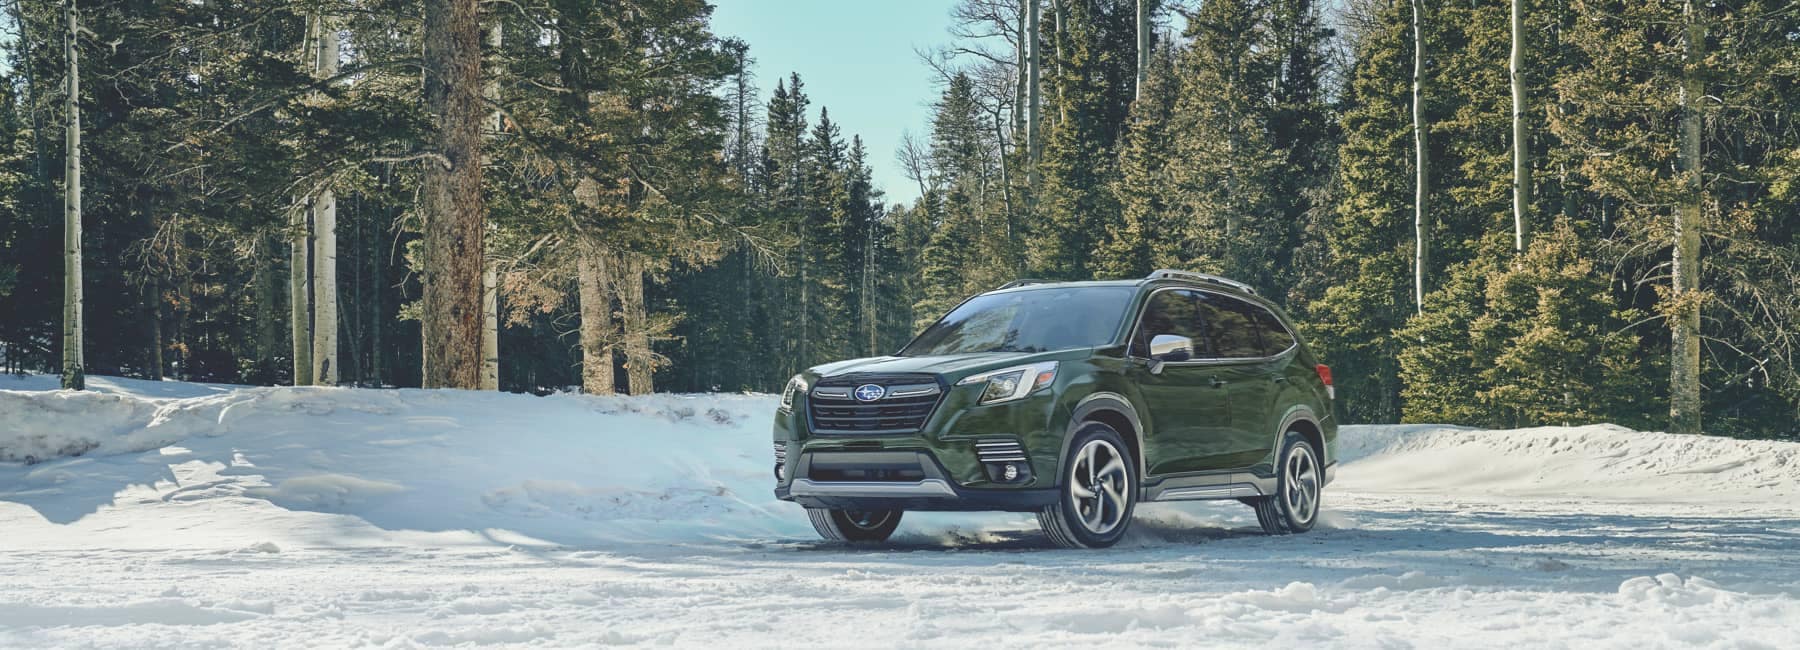 2022 Subaru Forester parked by a snowbank in a forest